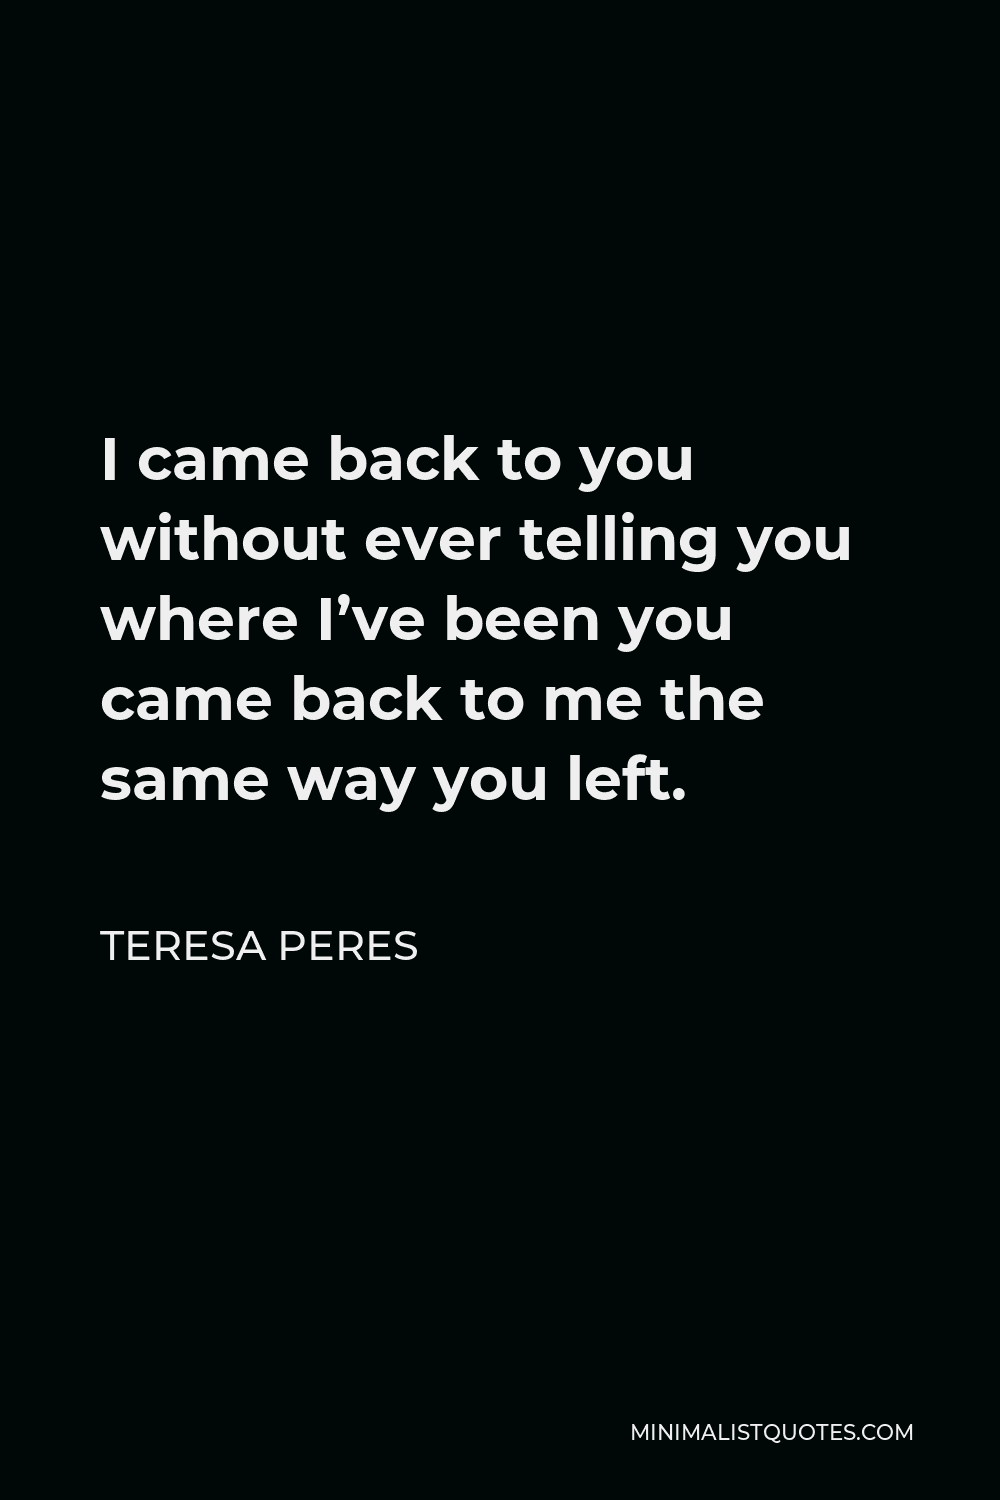 Teresa Peres Quote - I came back to you without ever telling you where I’ve been you came back to me the same way you left.